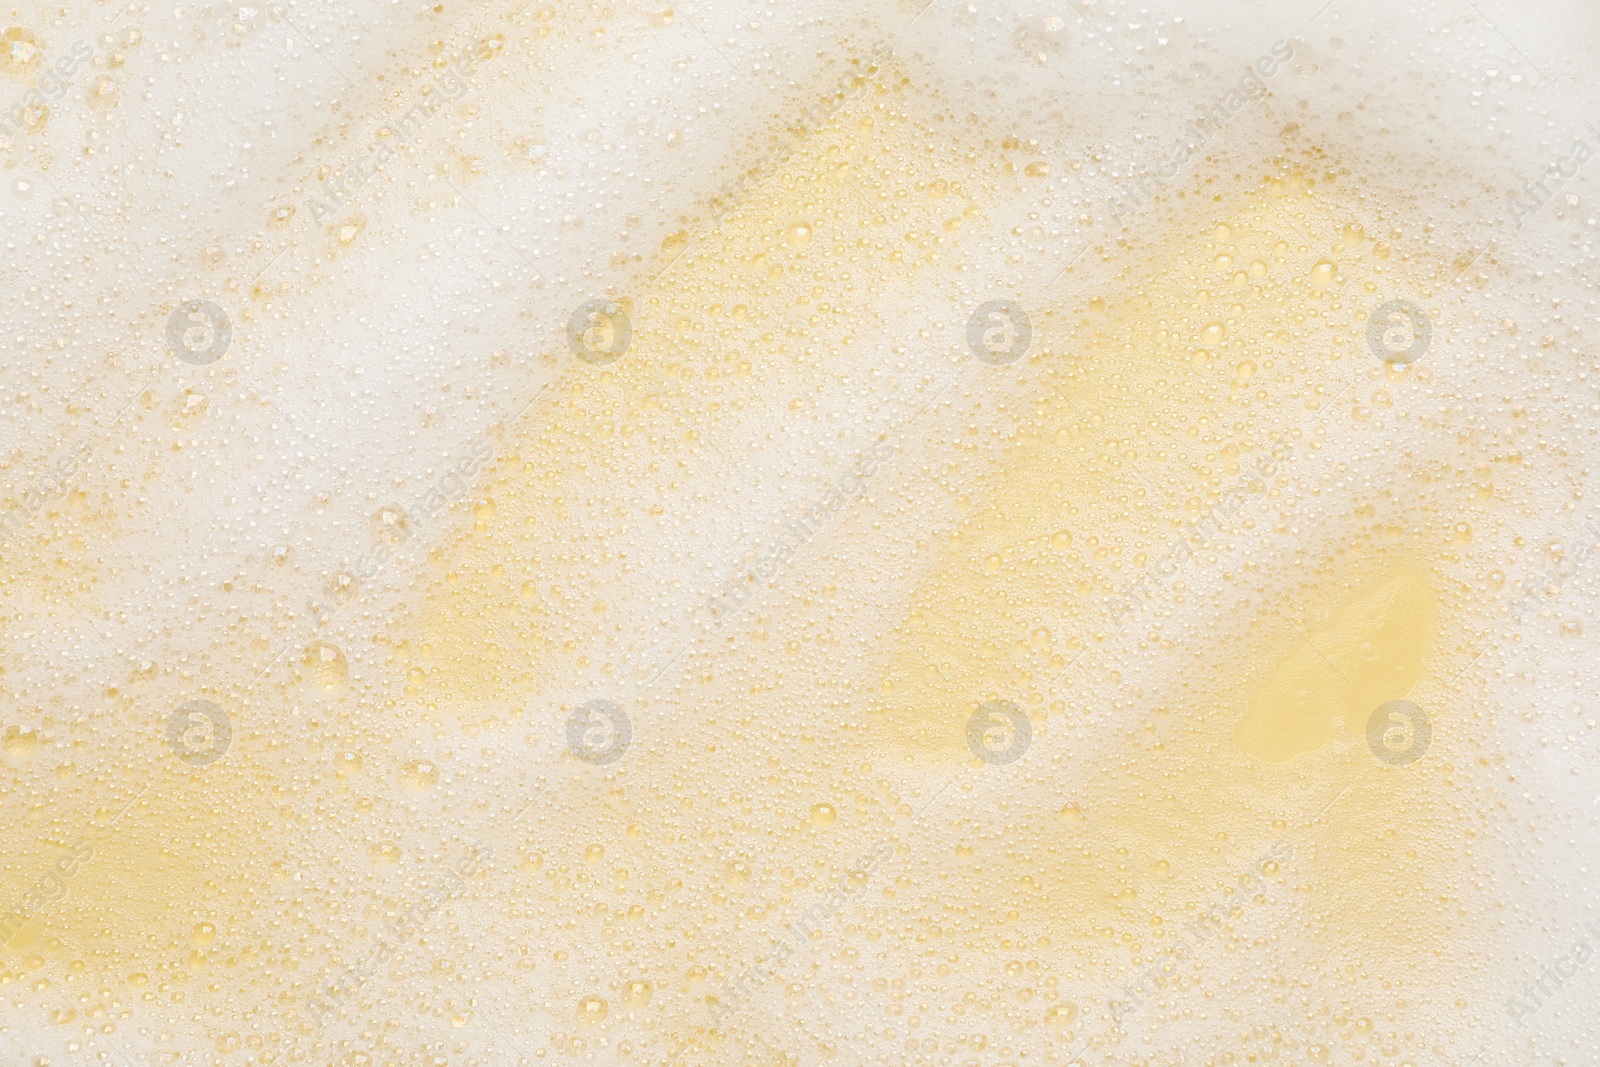 Photo of White washing foam on yellow background, top view